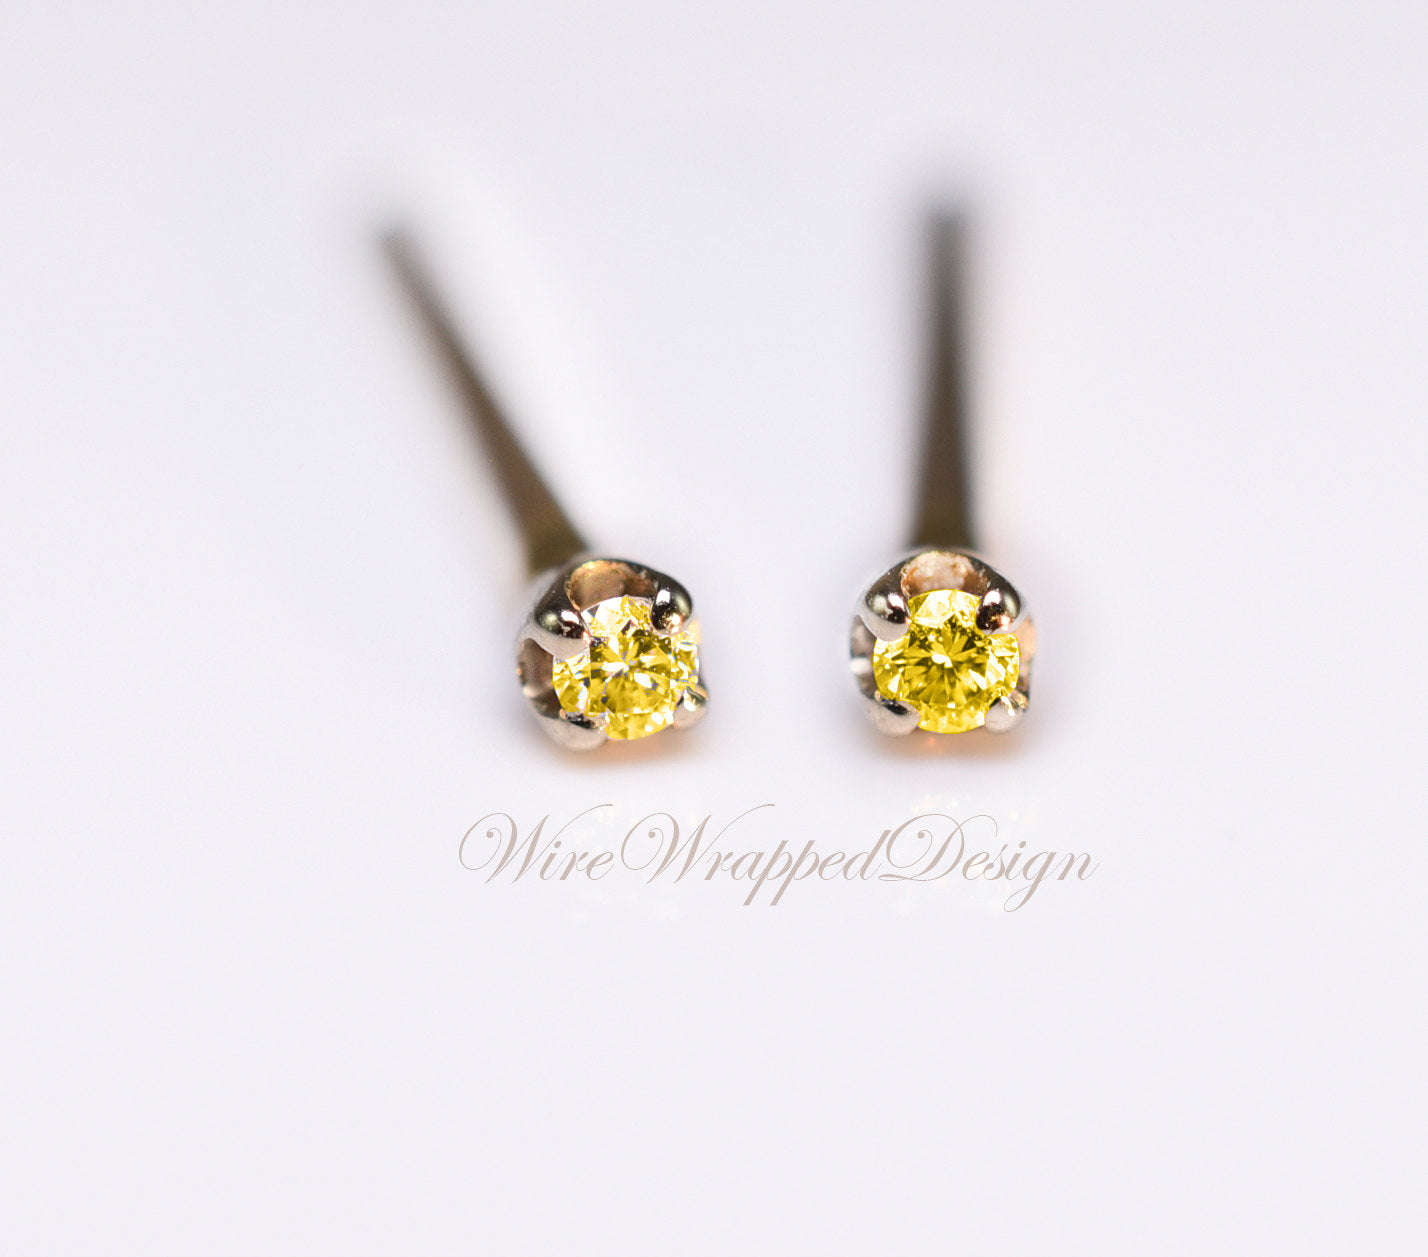 Genuine Canary Yellow DIAMOND Earring Studs 1.3mm 0.02tcw Post 14k Solid Gold (Yellow, Rose or White), Platinum, Silver Lobe Cartilage Helix